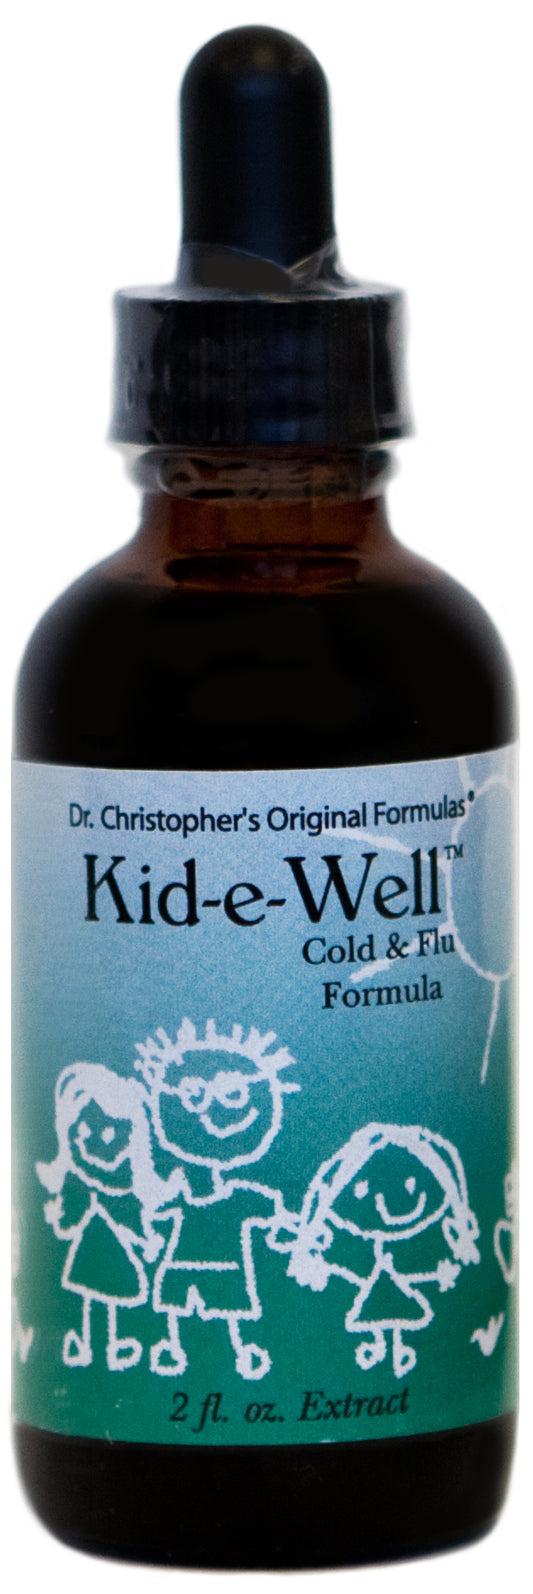 Dr. Christopher's Kid-e-Well Extract